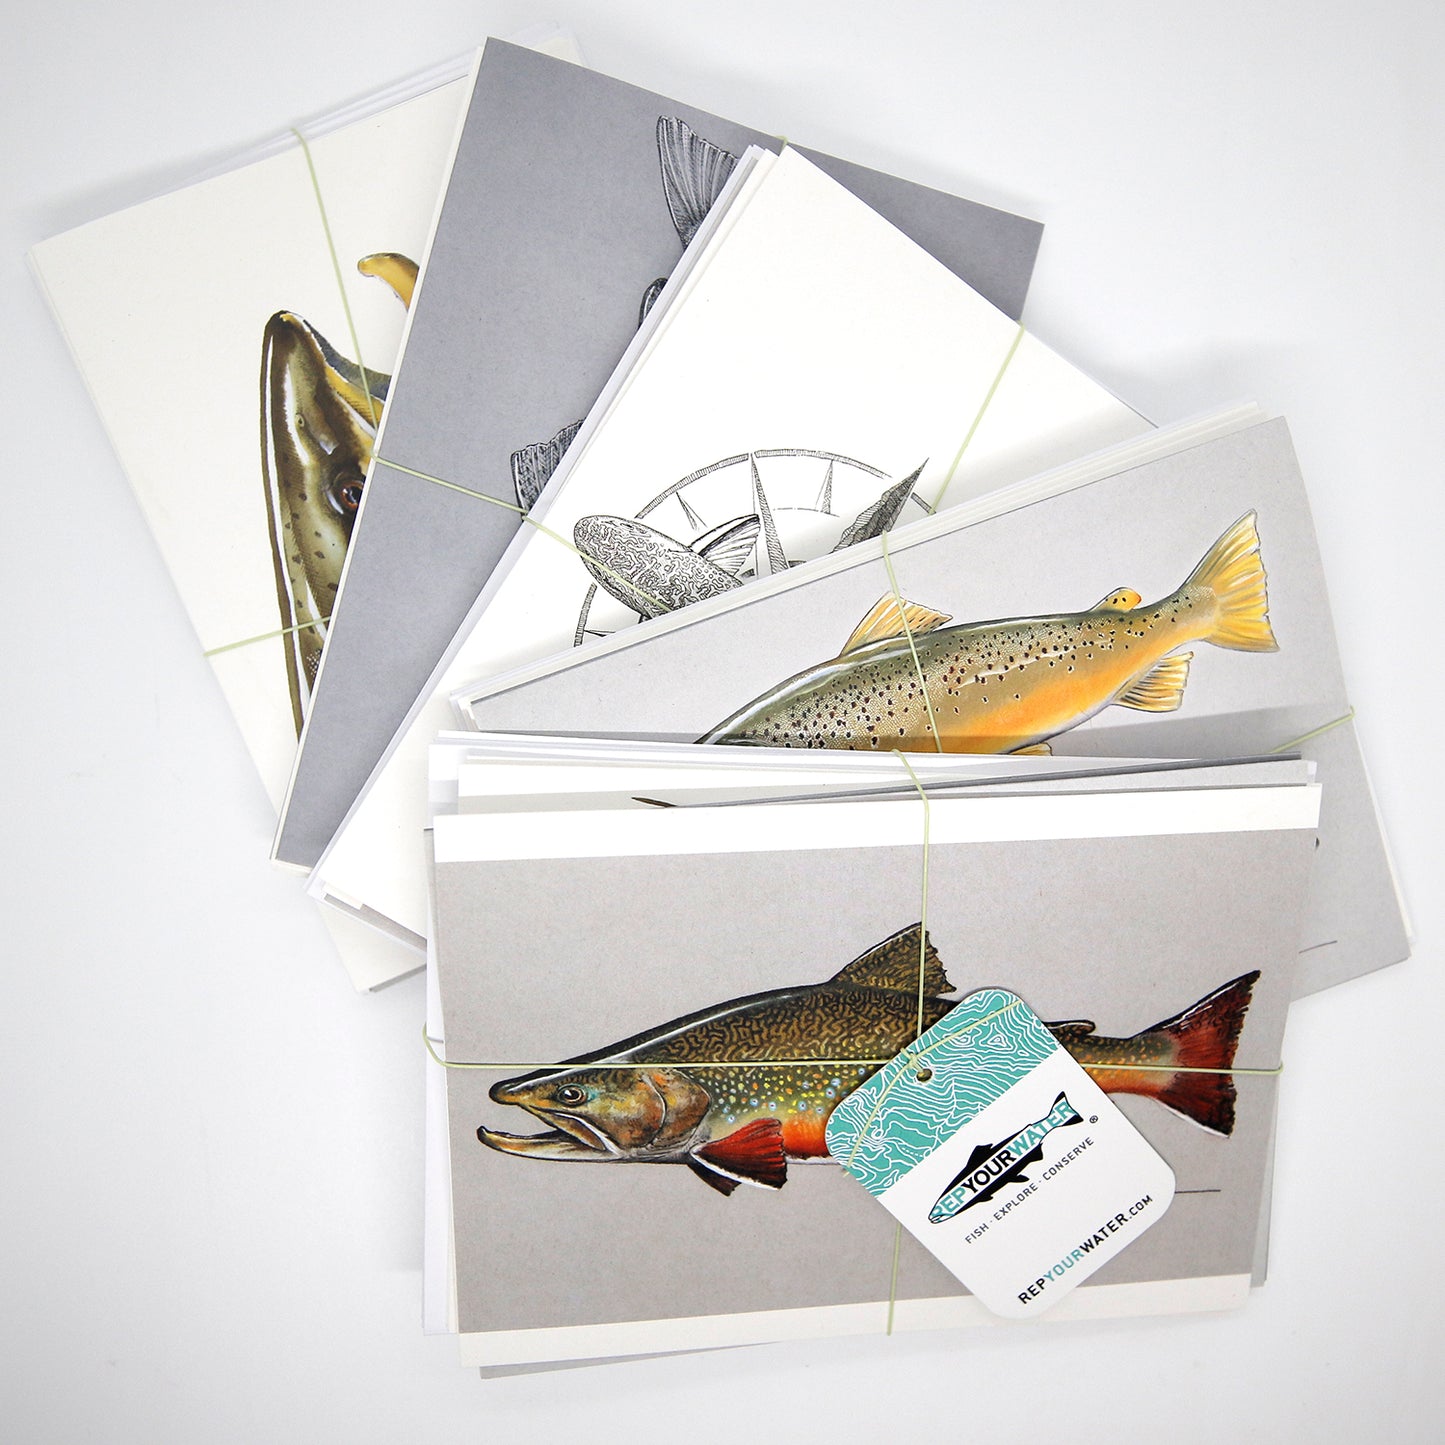 5 stacks of greeting cards in bundles wrapped by fly line and a hangtag on front that reads repyourwater inside a trout silhouette and fish explore conserve.  Repyourwater.com is on the hangtag.  The top image is a brook trout, then a brown trout, then part of a black and white trout then part of another trout then part of a trout face.  All are partially obscured by the one on top of the other